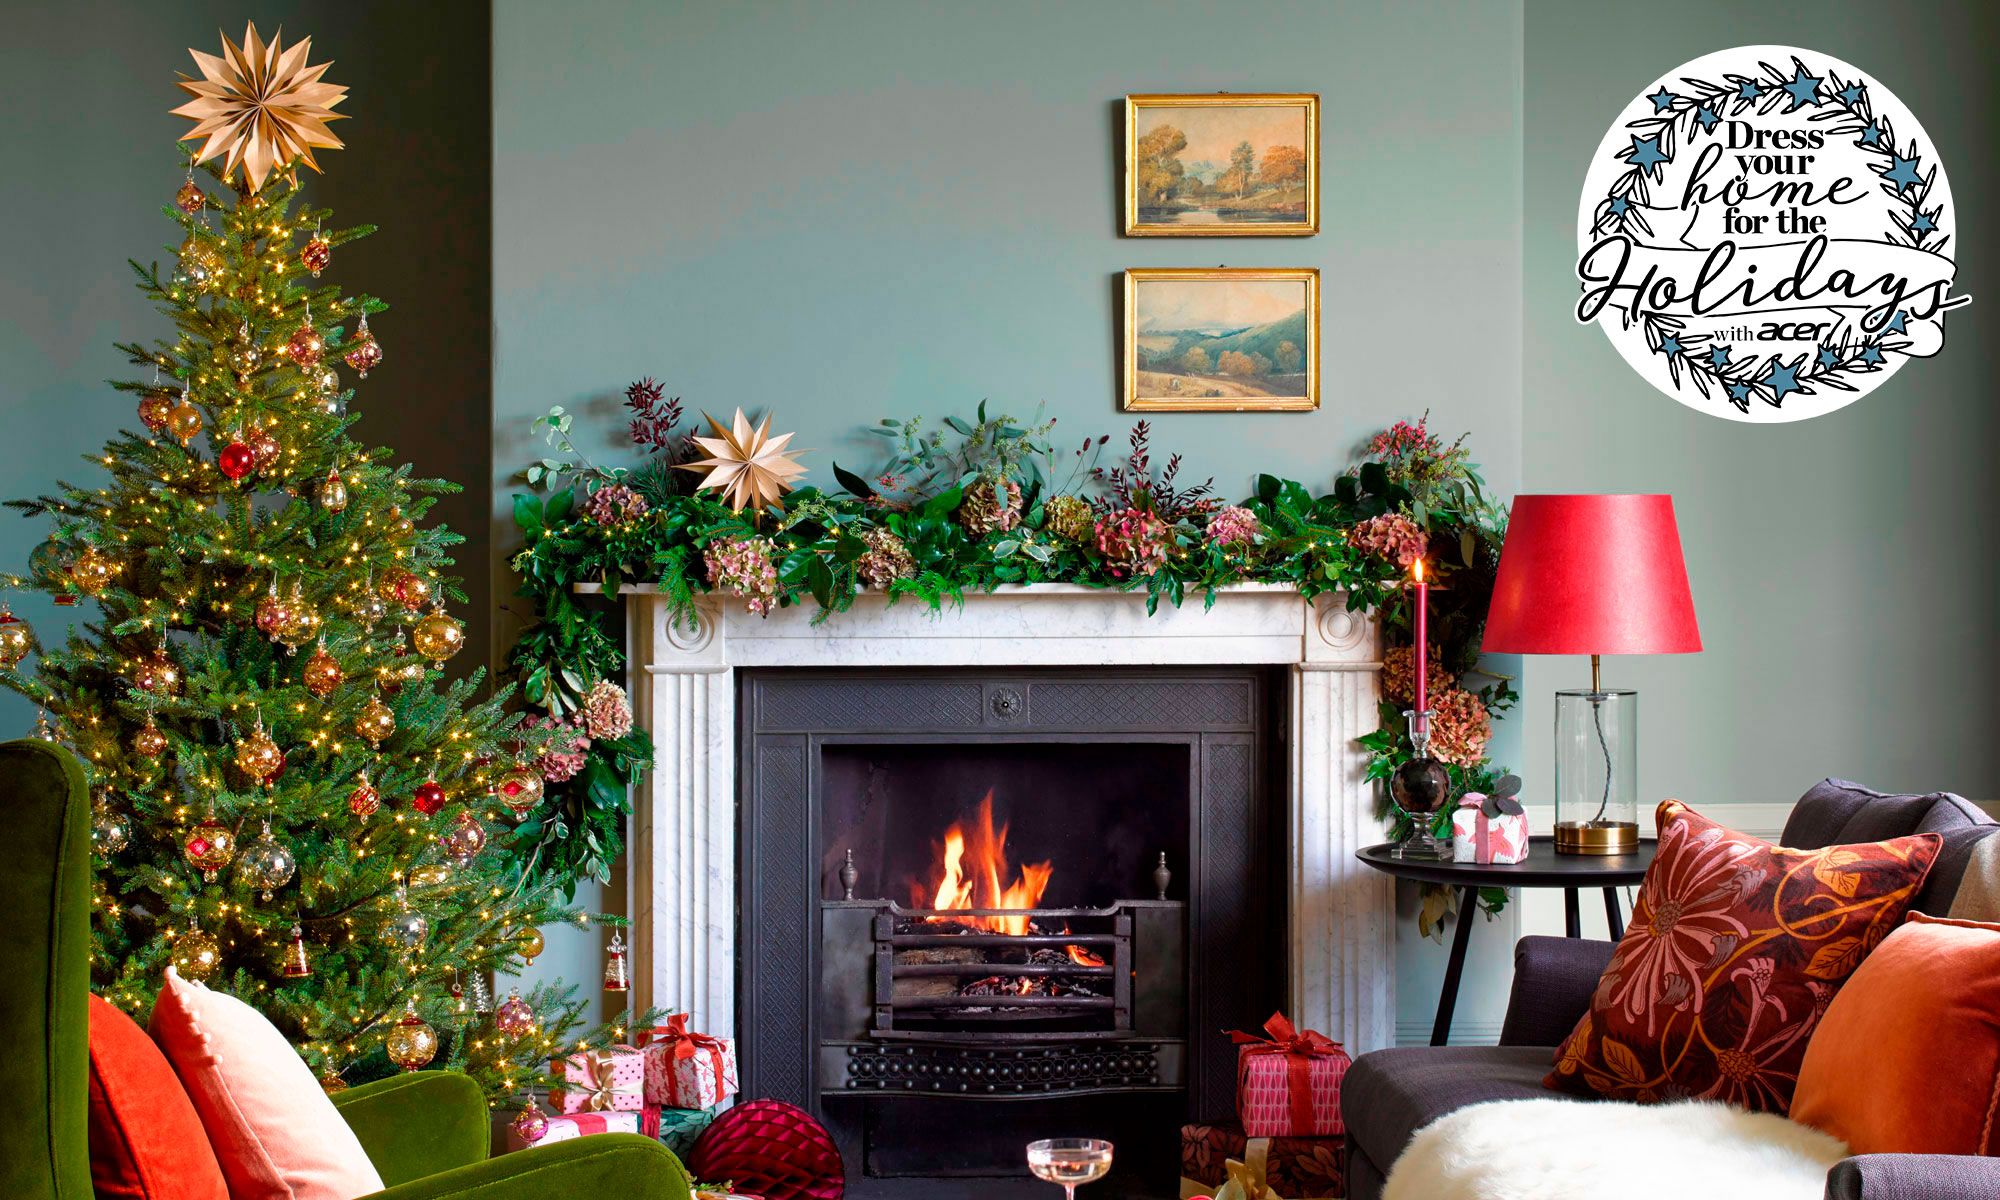 Christmas living room decorating ideas to get you in the festive spirit